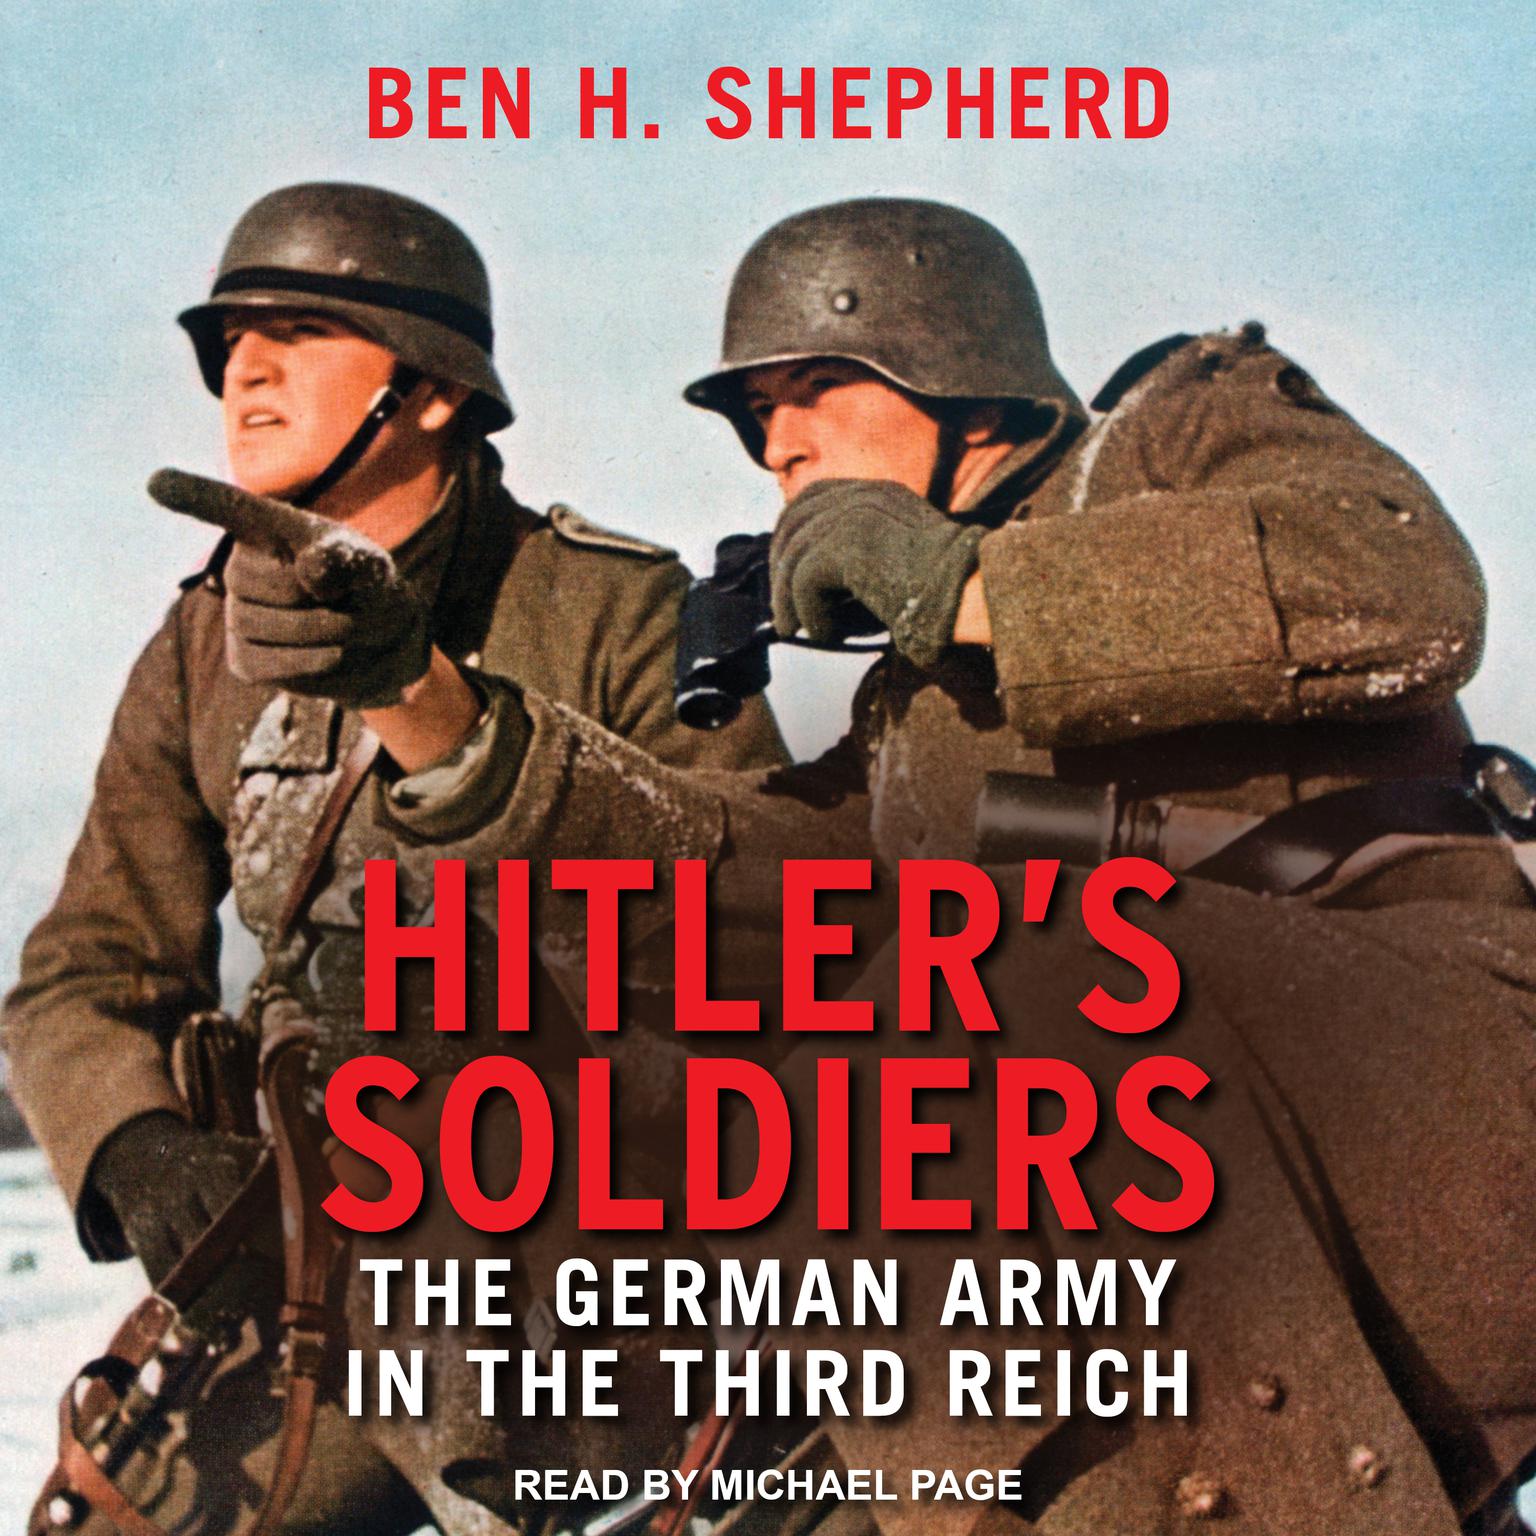 Hitlers Soldiers: The German Army in the Third Reich Audiobook, by Ben H. Shepherd